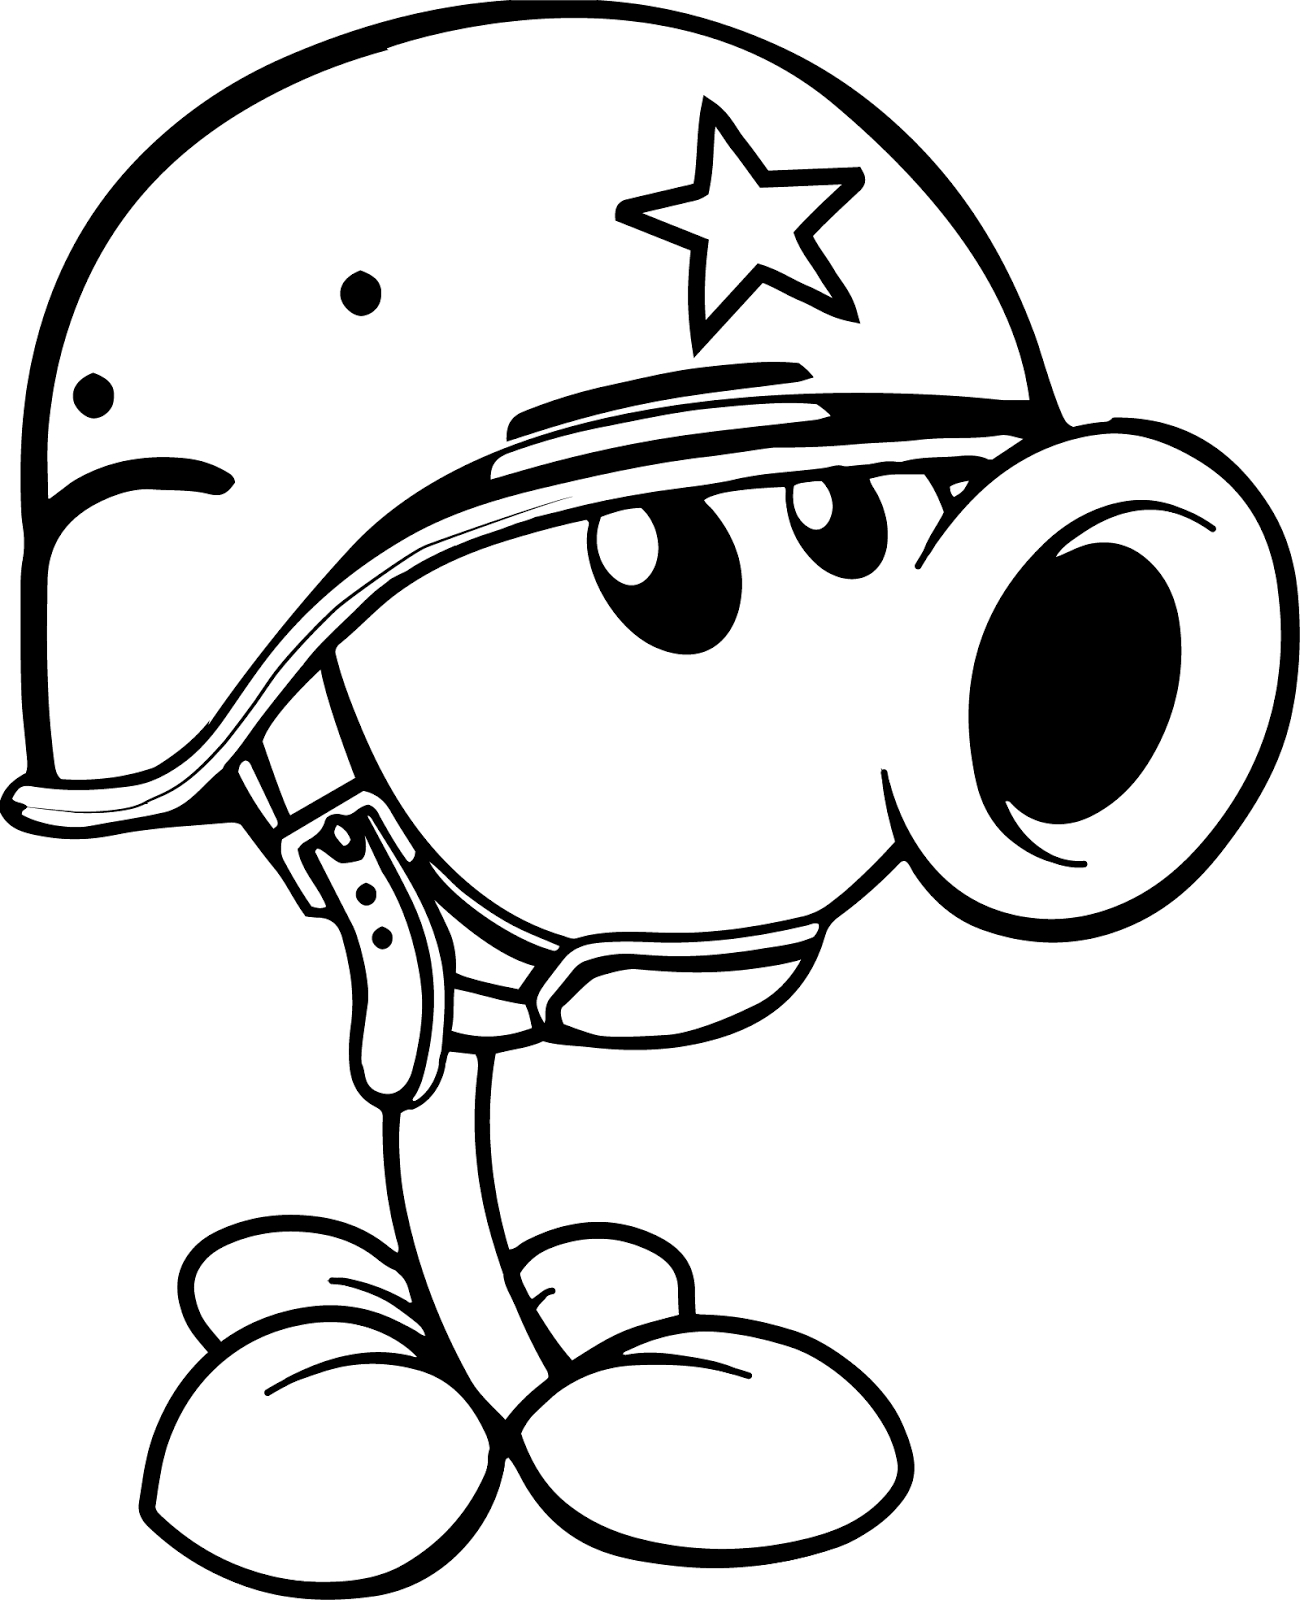 Hedendaags Plants Vs Zombies Coloring Pages | Coloring Pages 2019 GO-95